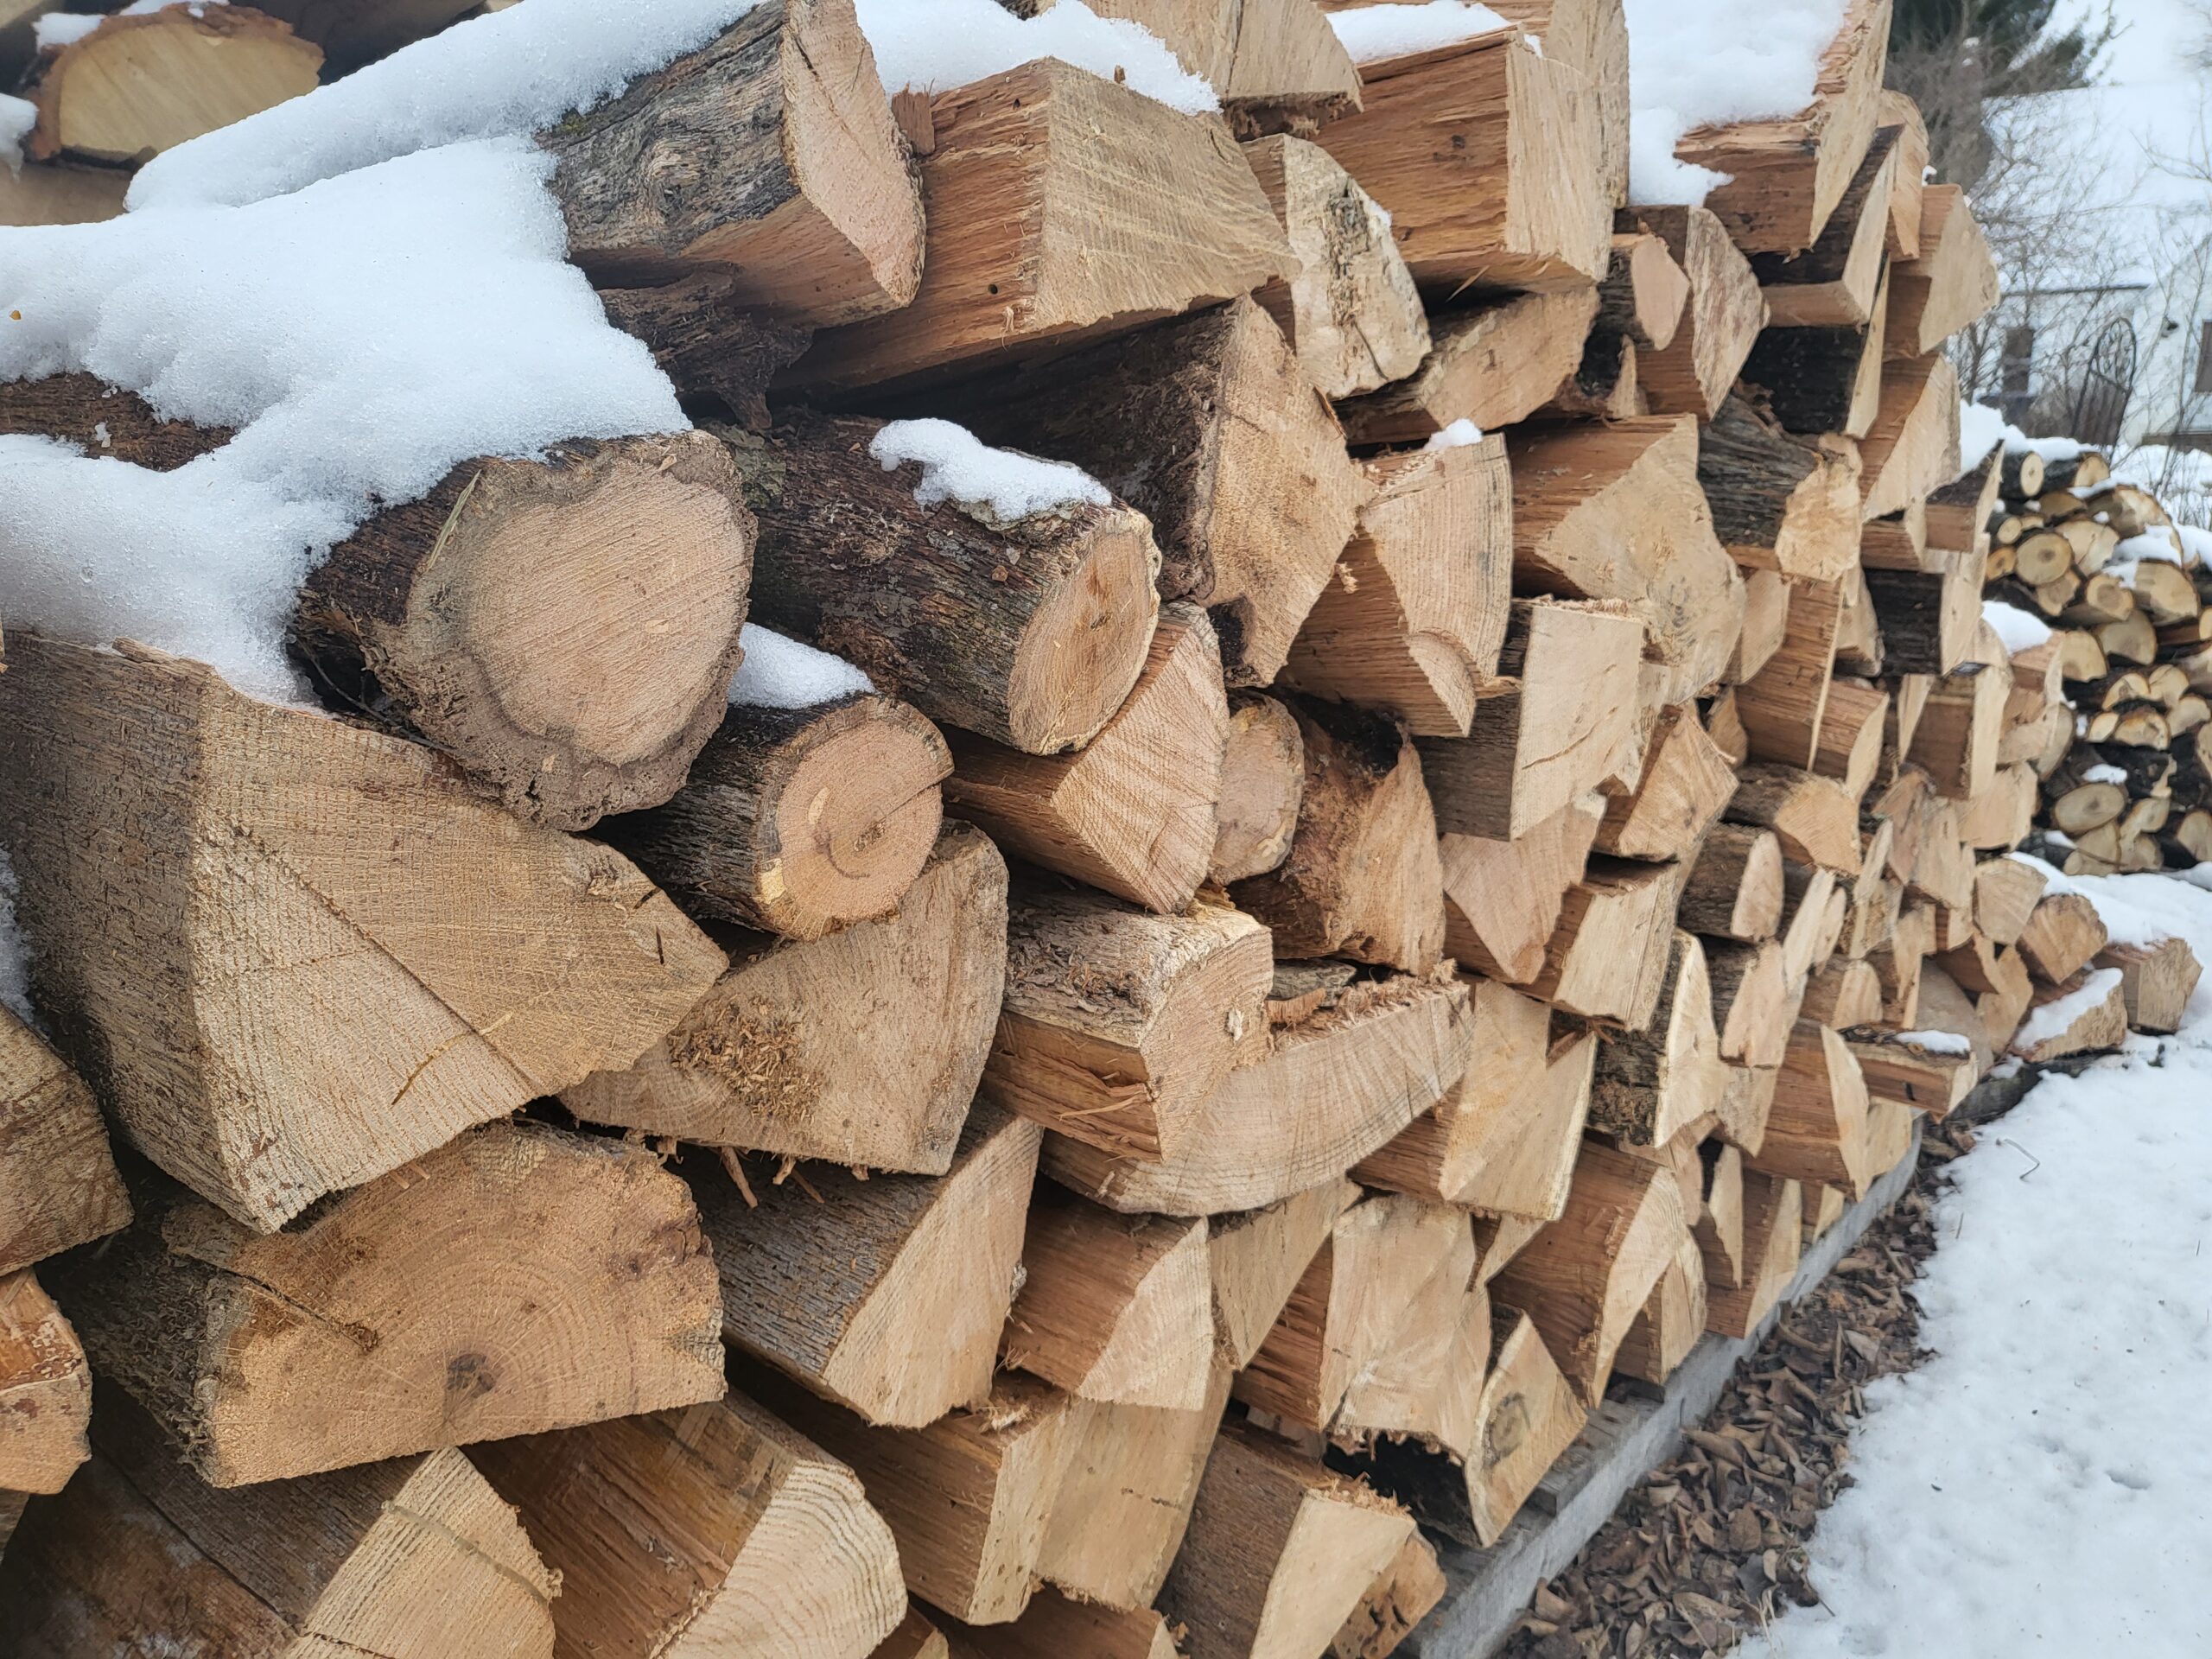 Logs cut for firewood are stacked high. There is snow on top of them.